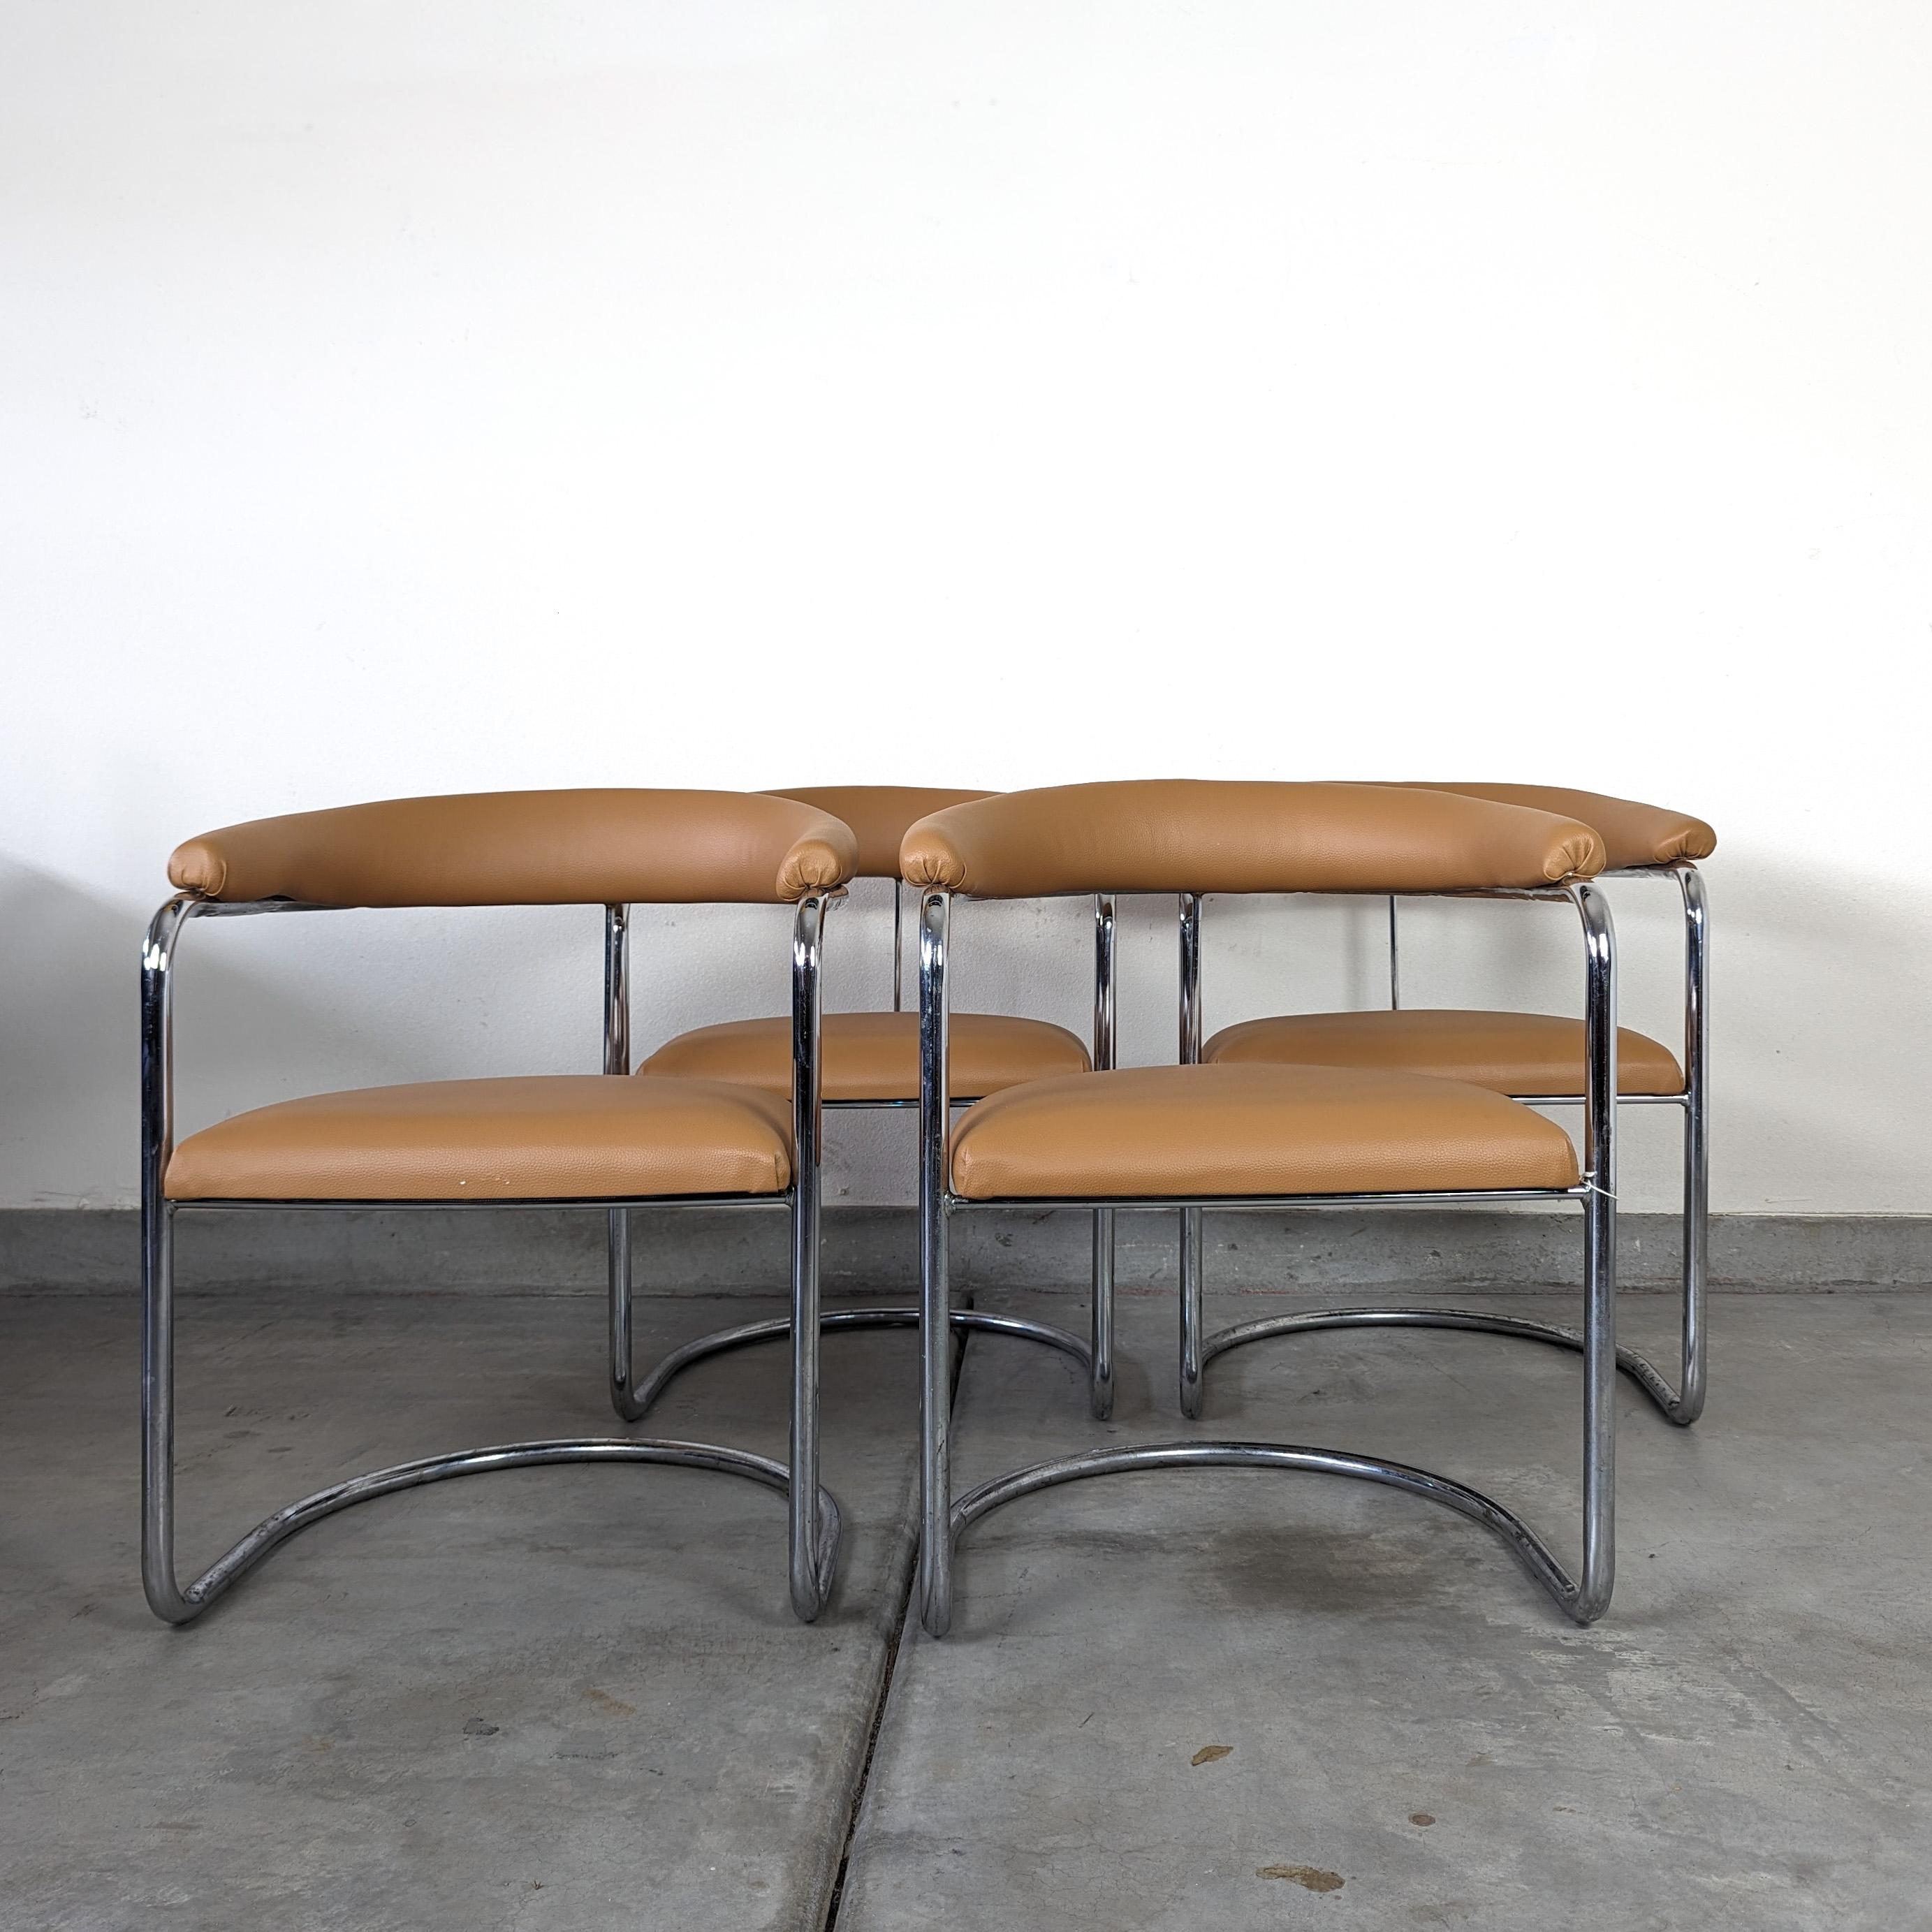 Mid-Century Modern Mid Century Cantilevered SS33 Armchairs by Anton Lorenz for Thonet, c1970s